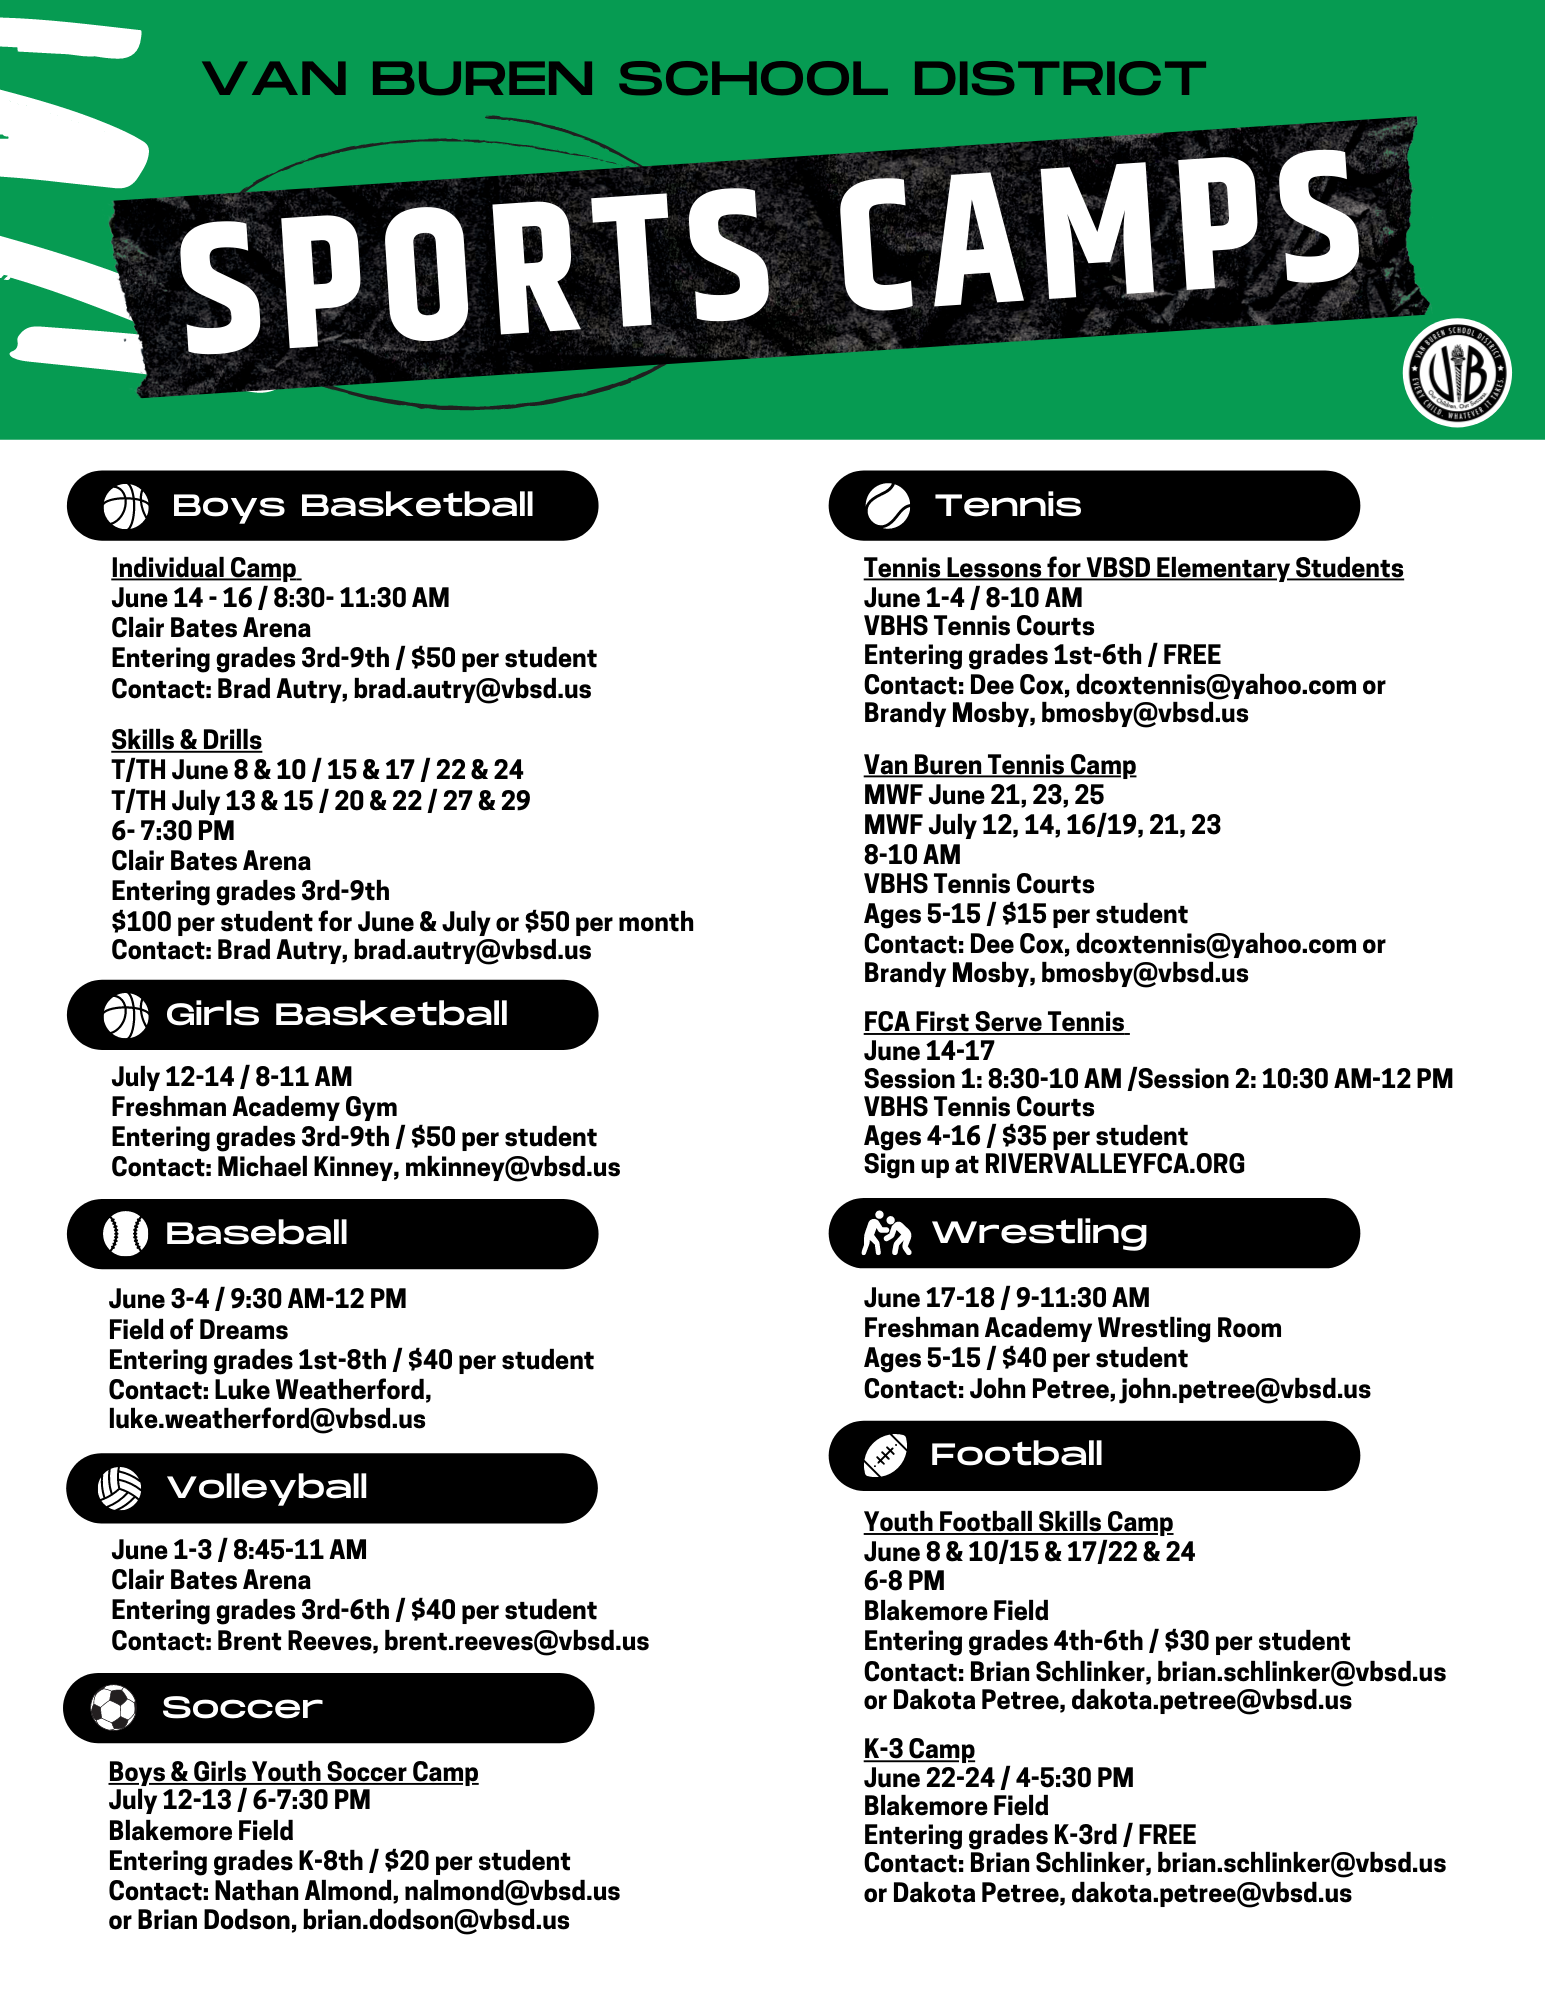 VBSD to Host Summer Sports Camps